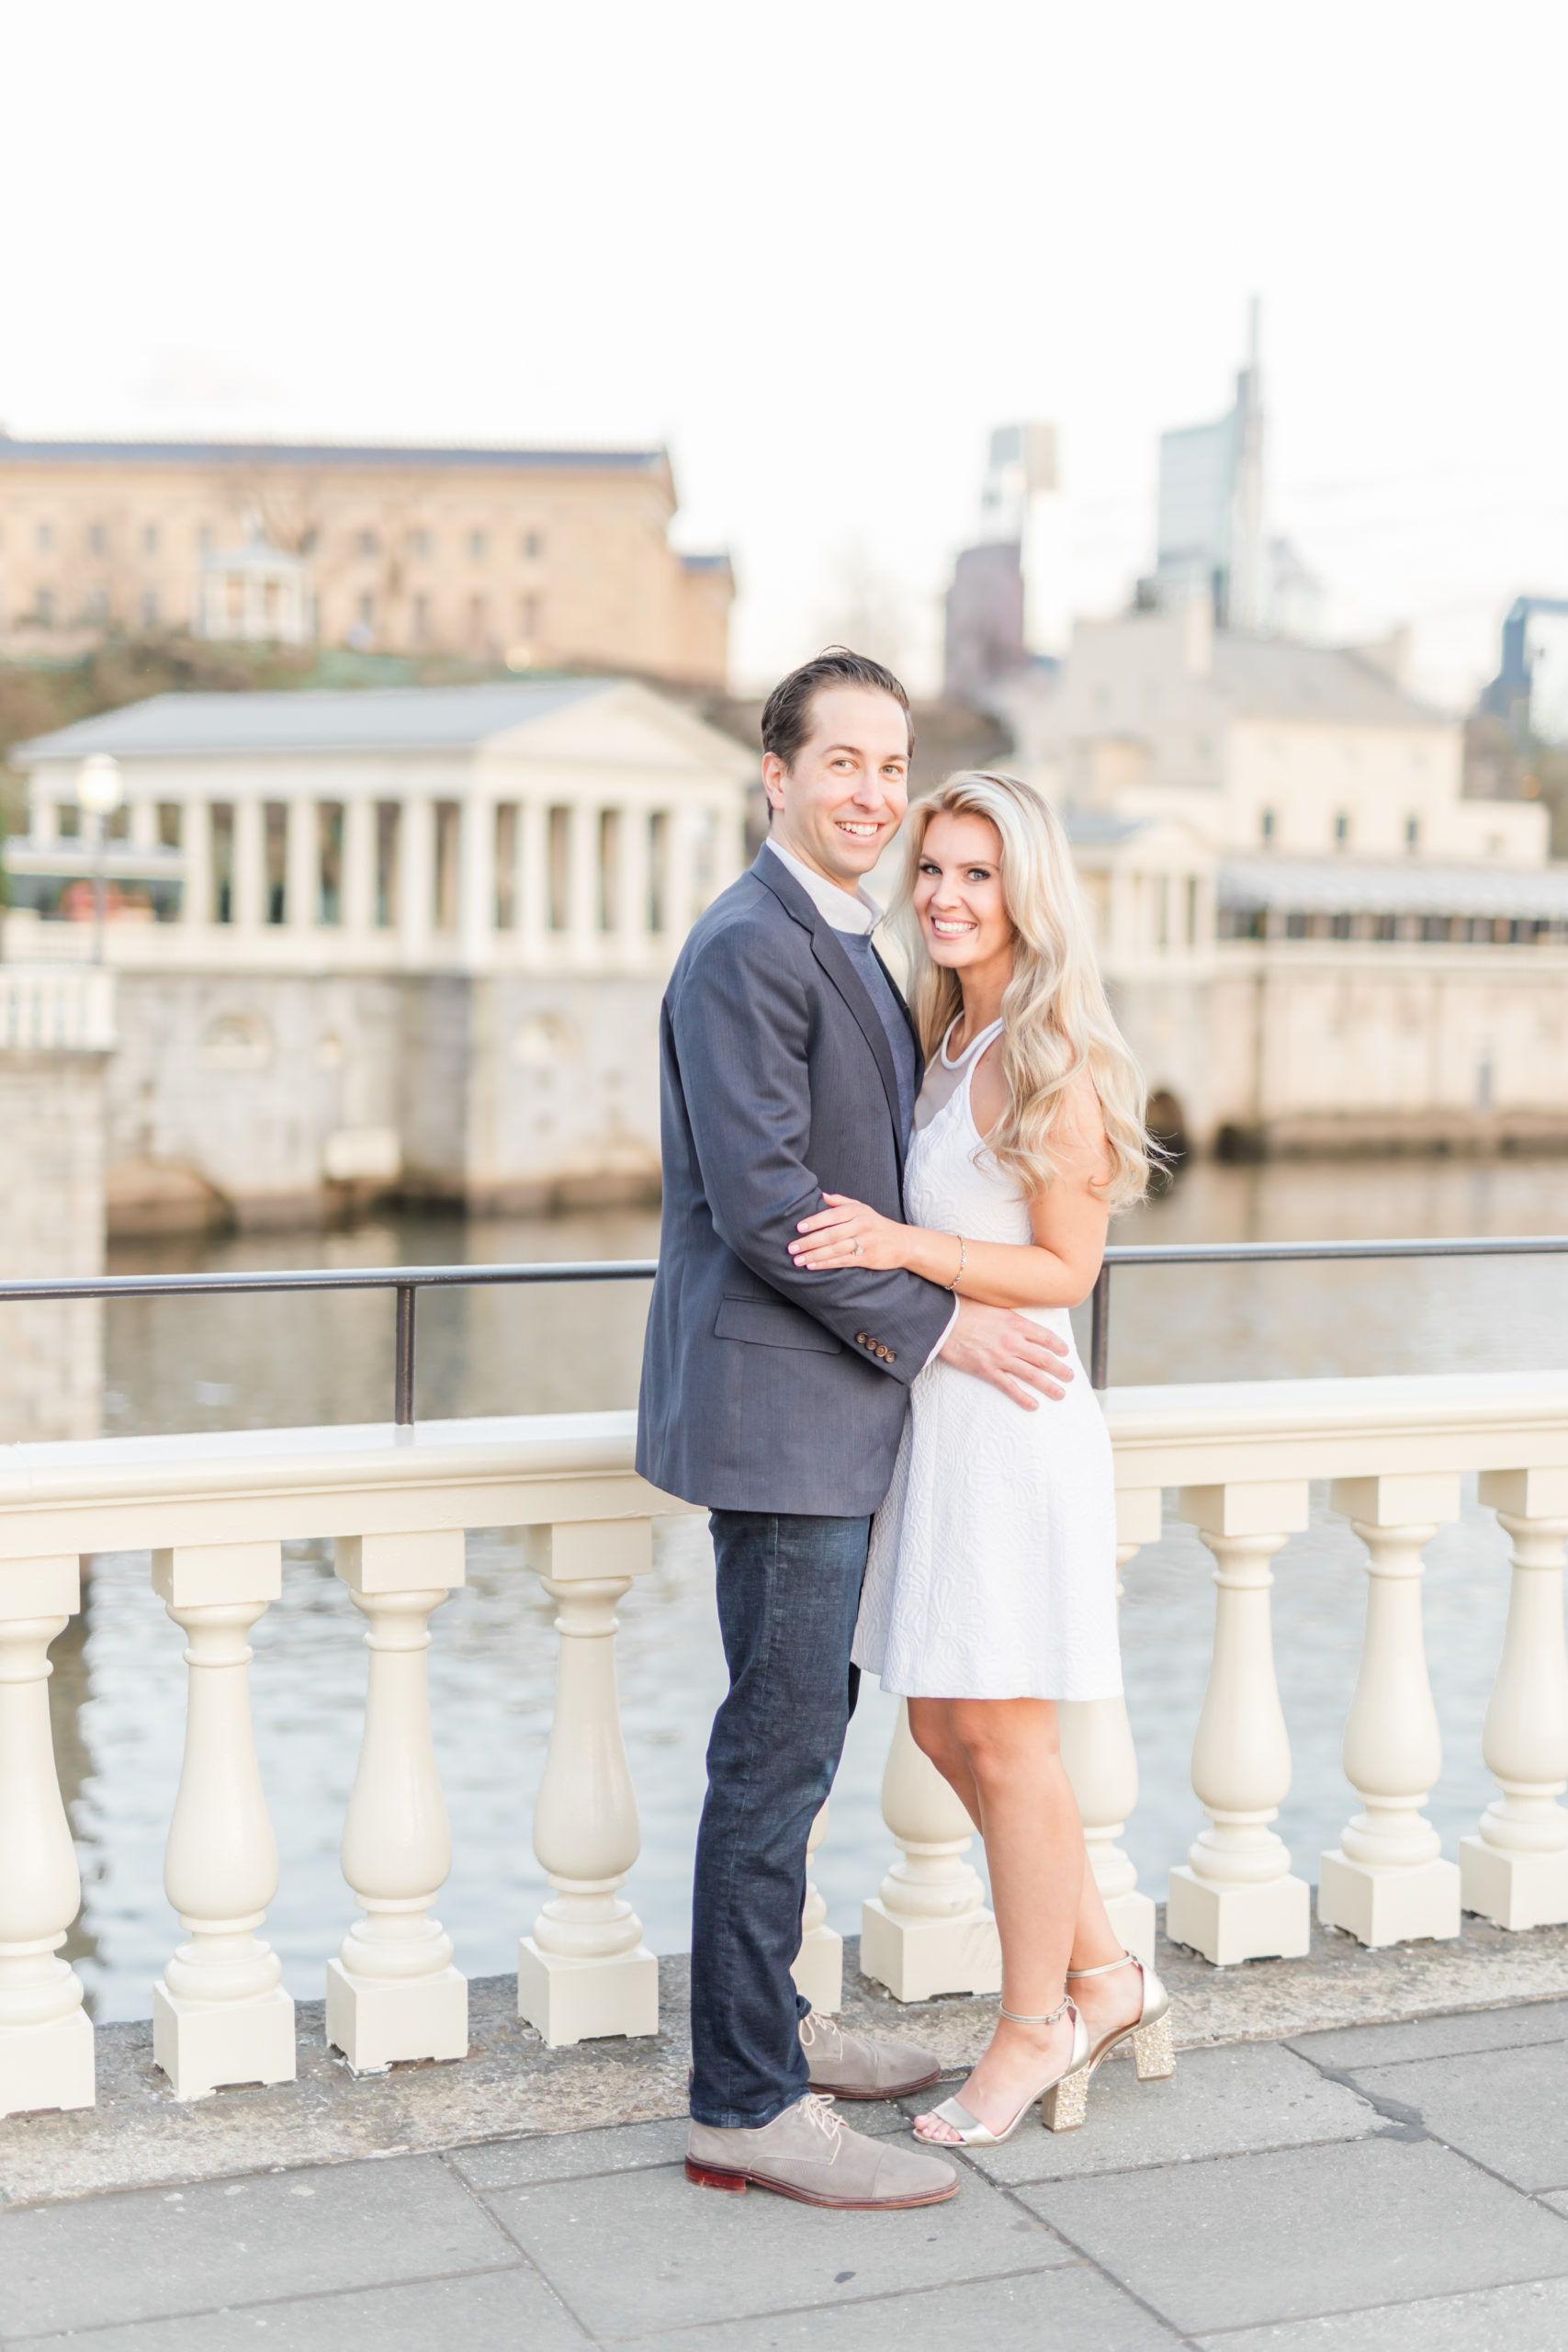 Engagement session in Philadelphia by Always Avery Photography